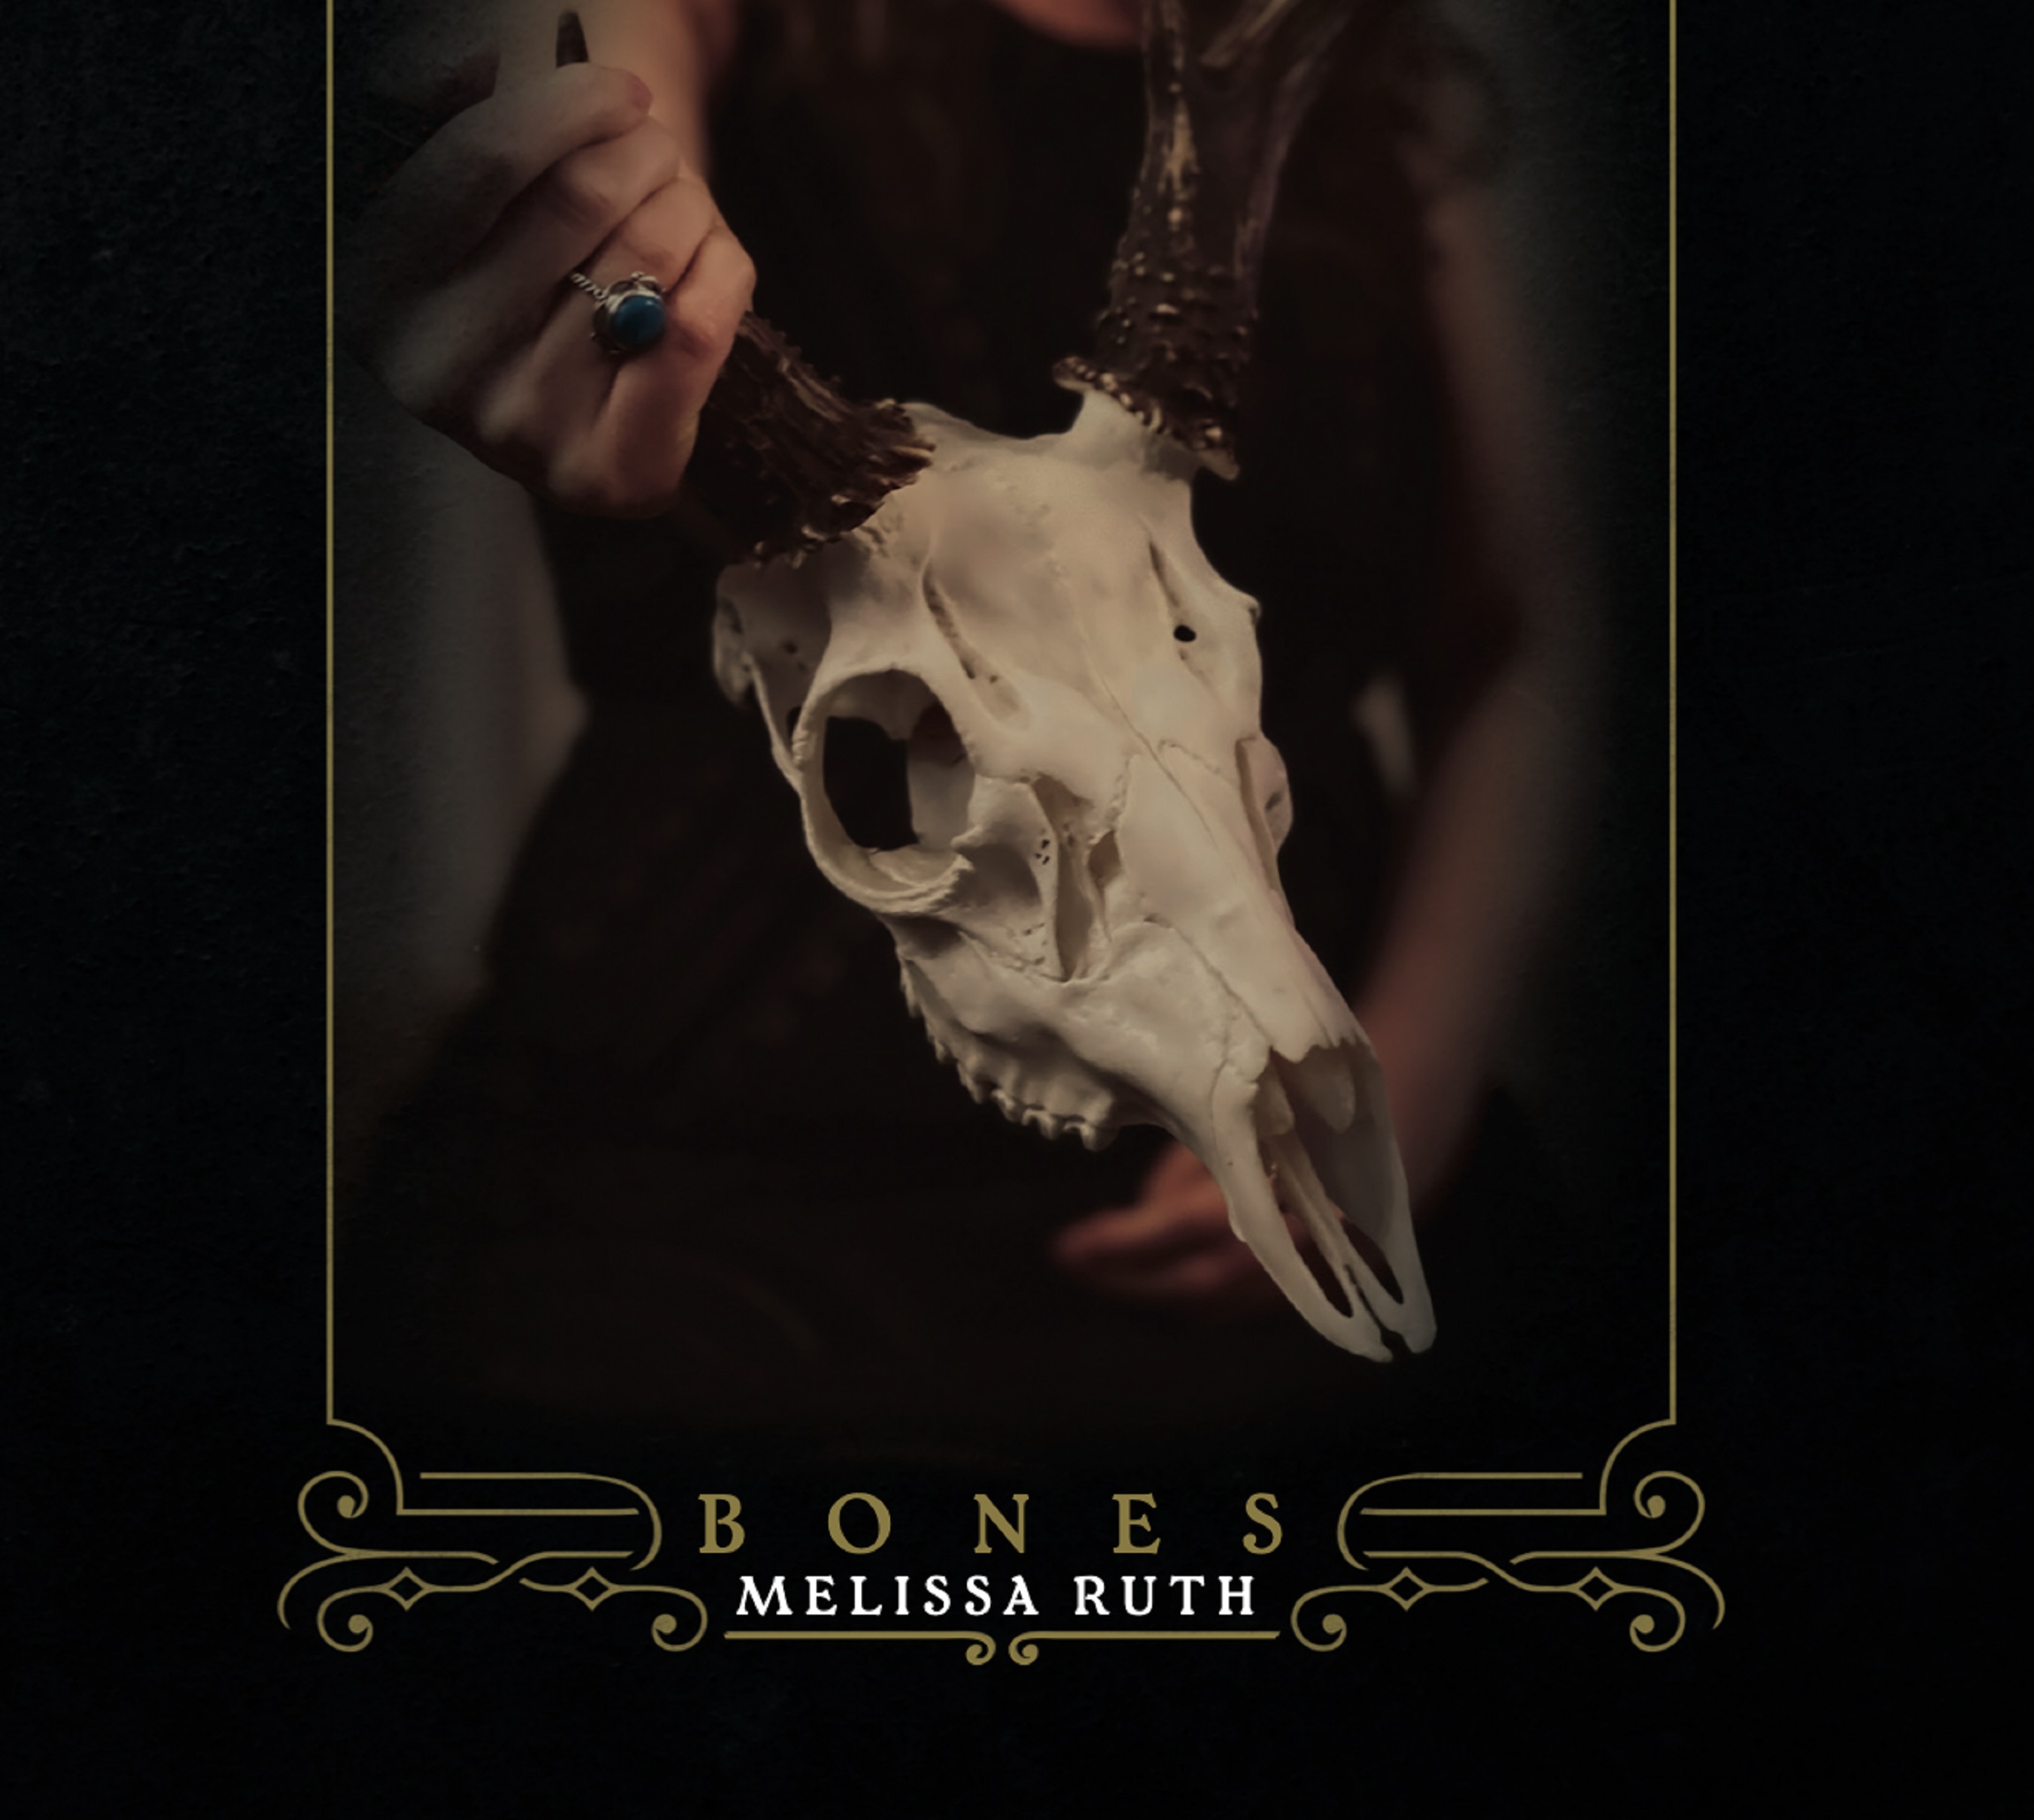 Pacific Northwest spirits come alive on Melissa Ruth's "Bones," releasing March 24